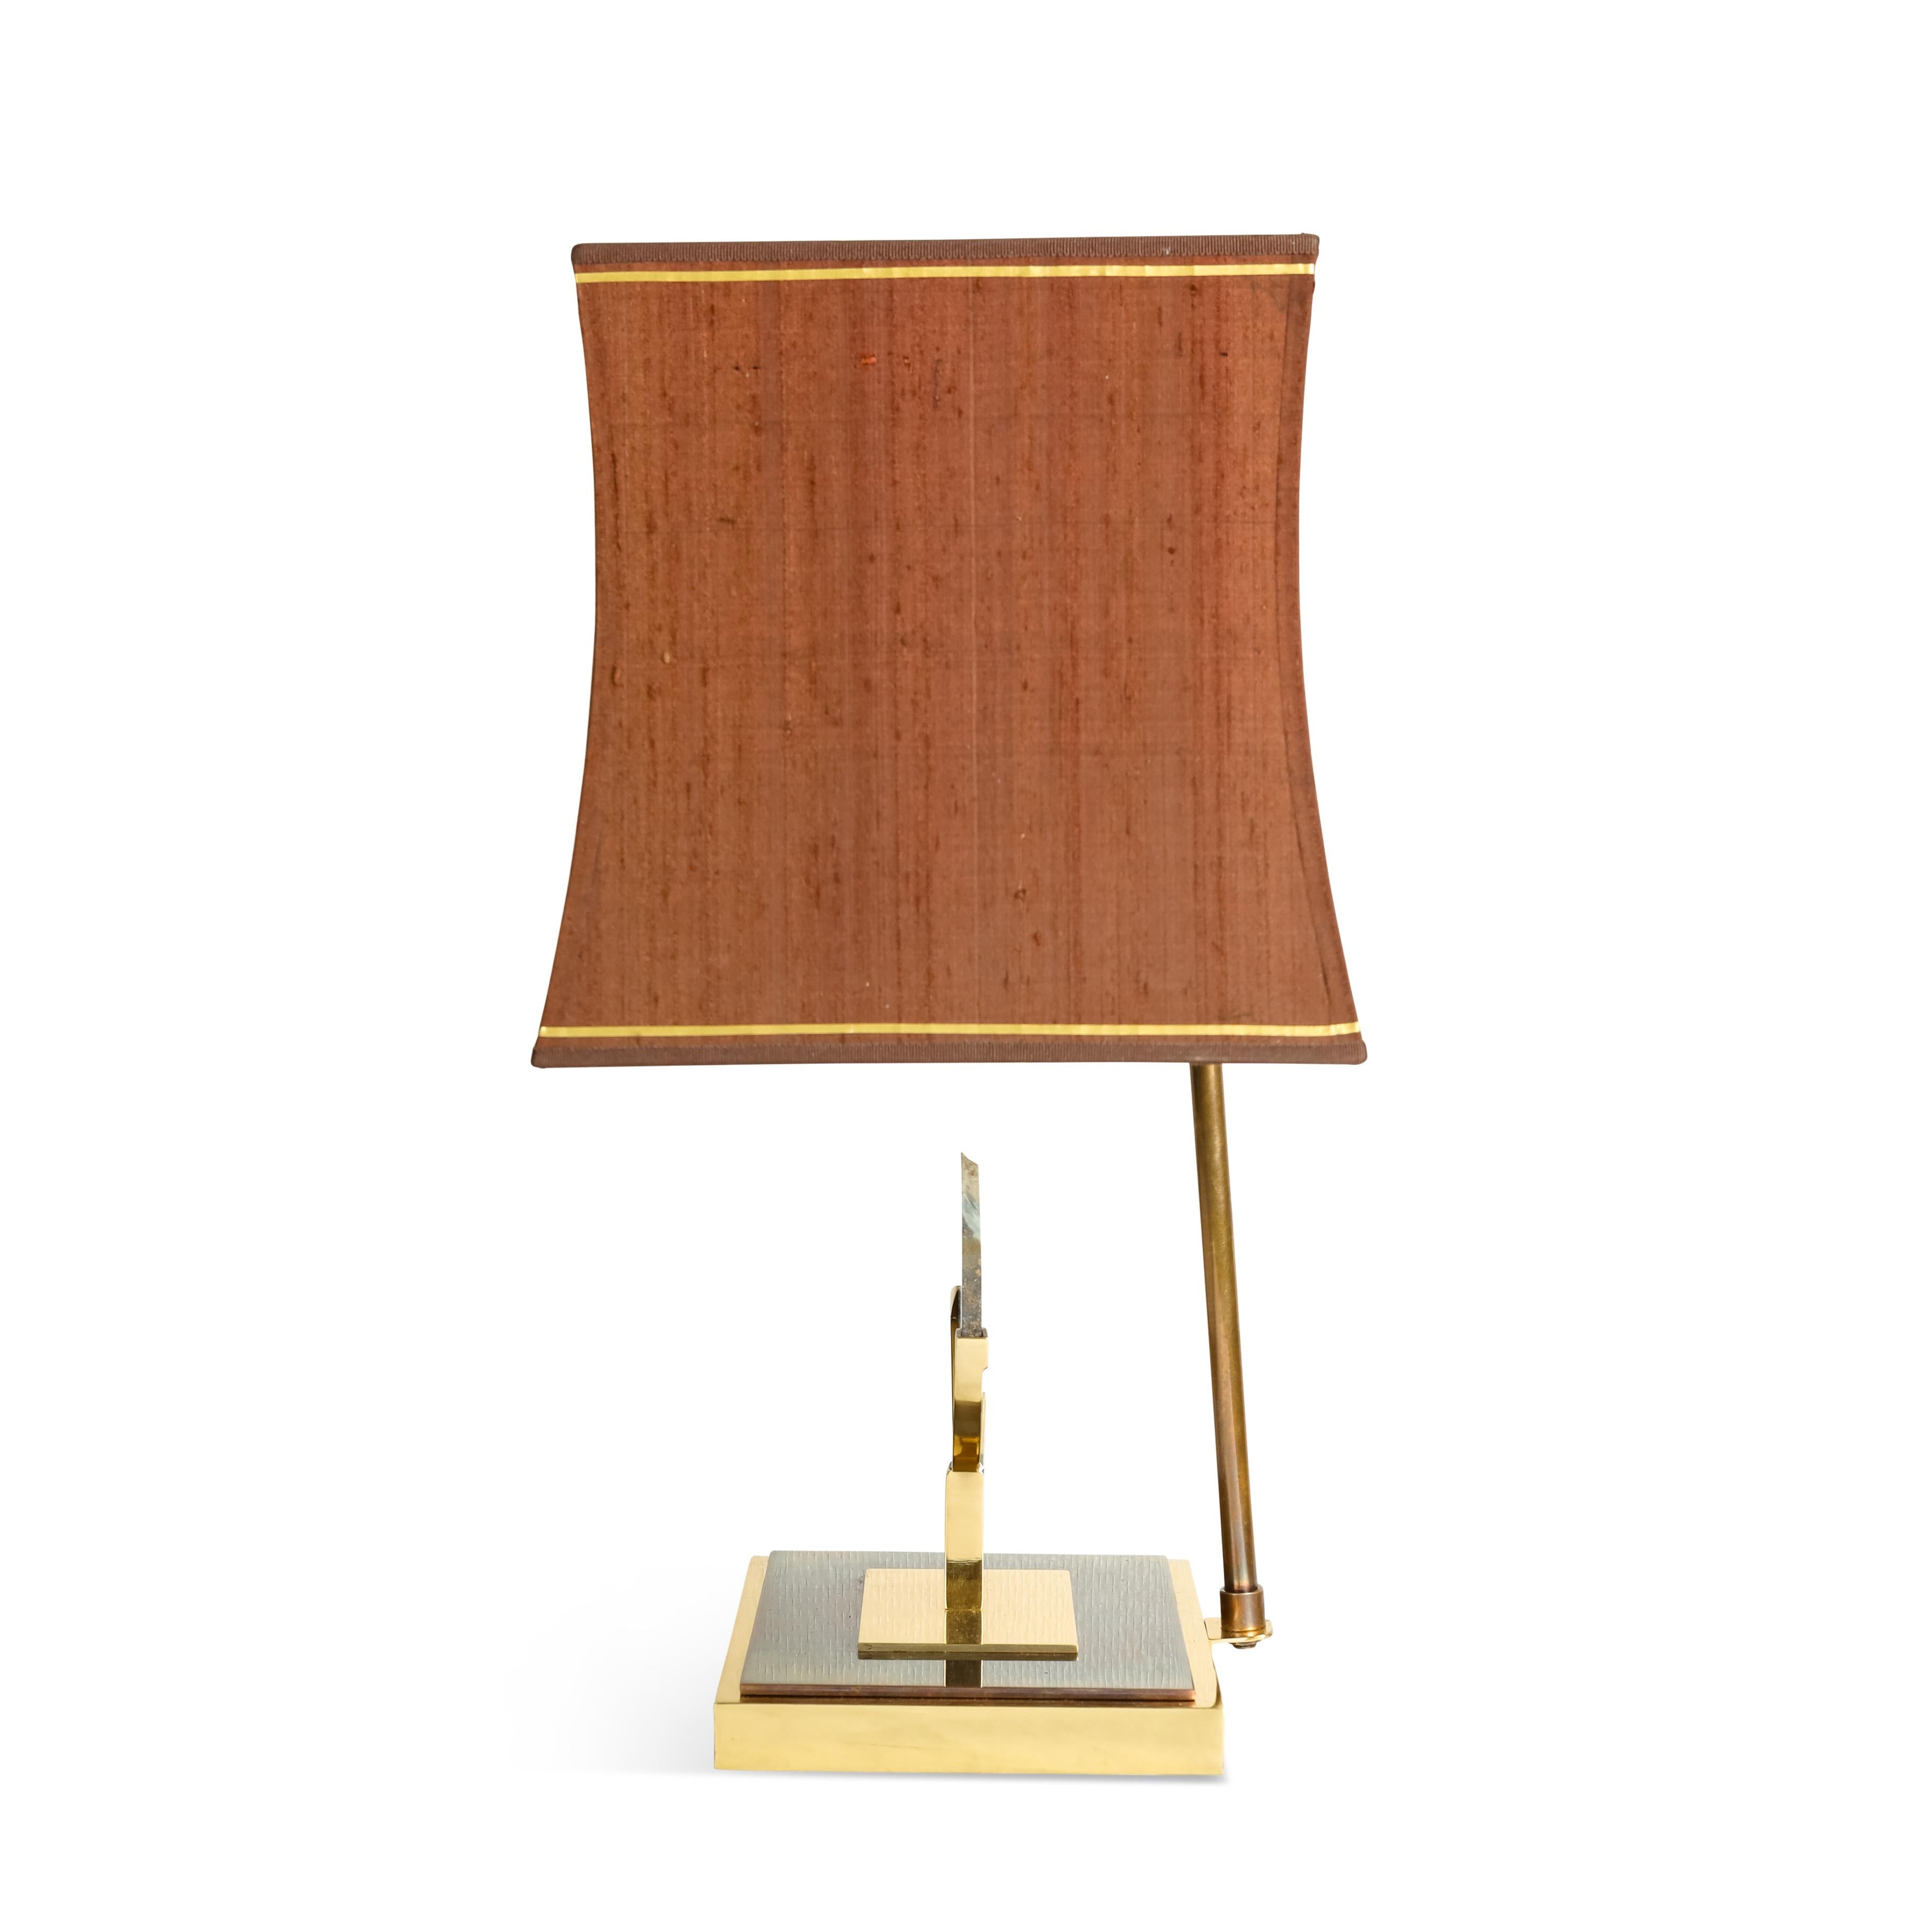 This very elegant  lamp is in brass with a rectangular base with 2 tones and an agate stone held by  brass clips. The lamp was professionally re-finished and its shade was custom made with a gold trim. The lamp has been American wired with two